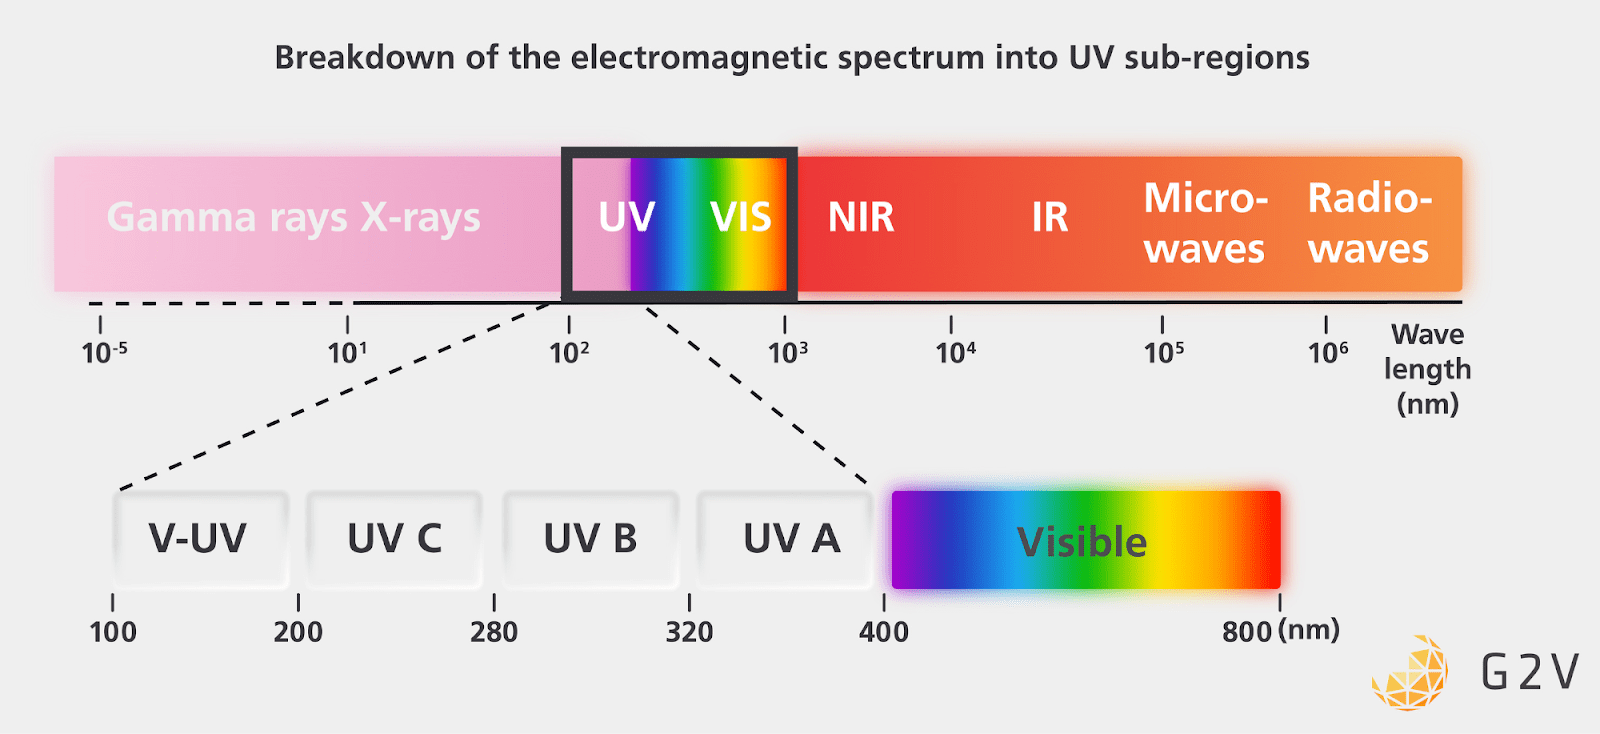 The Ultraviolet (UV) portion of the electromagnetic spectrum can be subdivided into UV-A, UV-B, UV-C and V-UV (vacuum-UV), each of which has different effects on materials